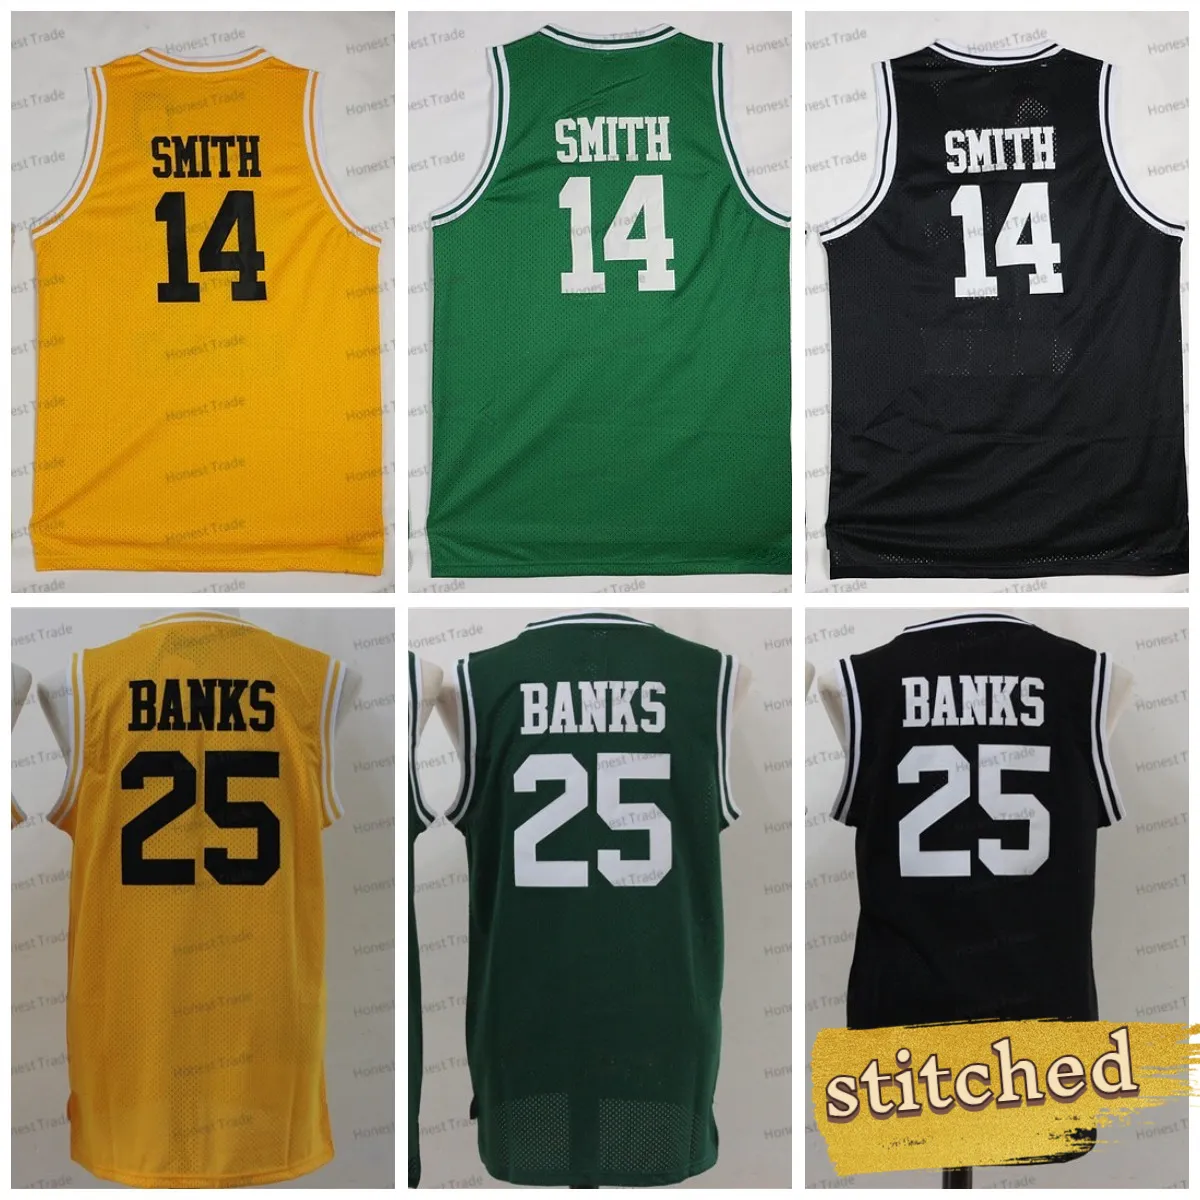 Film 14 Will Smith Basketball Jersey 25 Banks The Fresh Prince of Bel Air Academy Black Yellow Green Stitched Retro Mens Jerseys